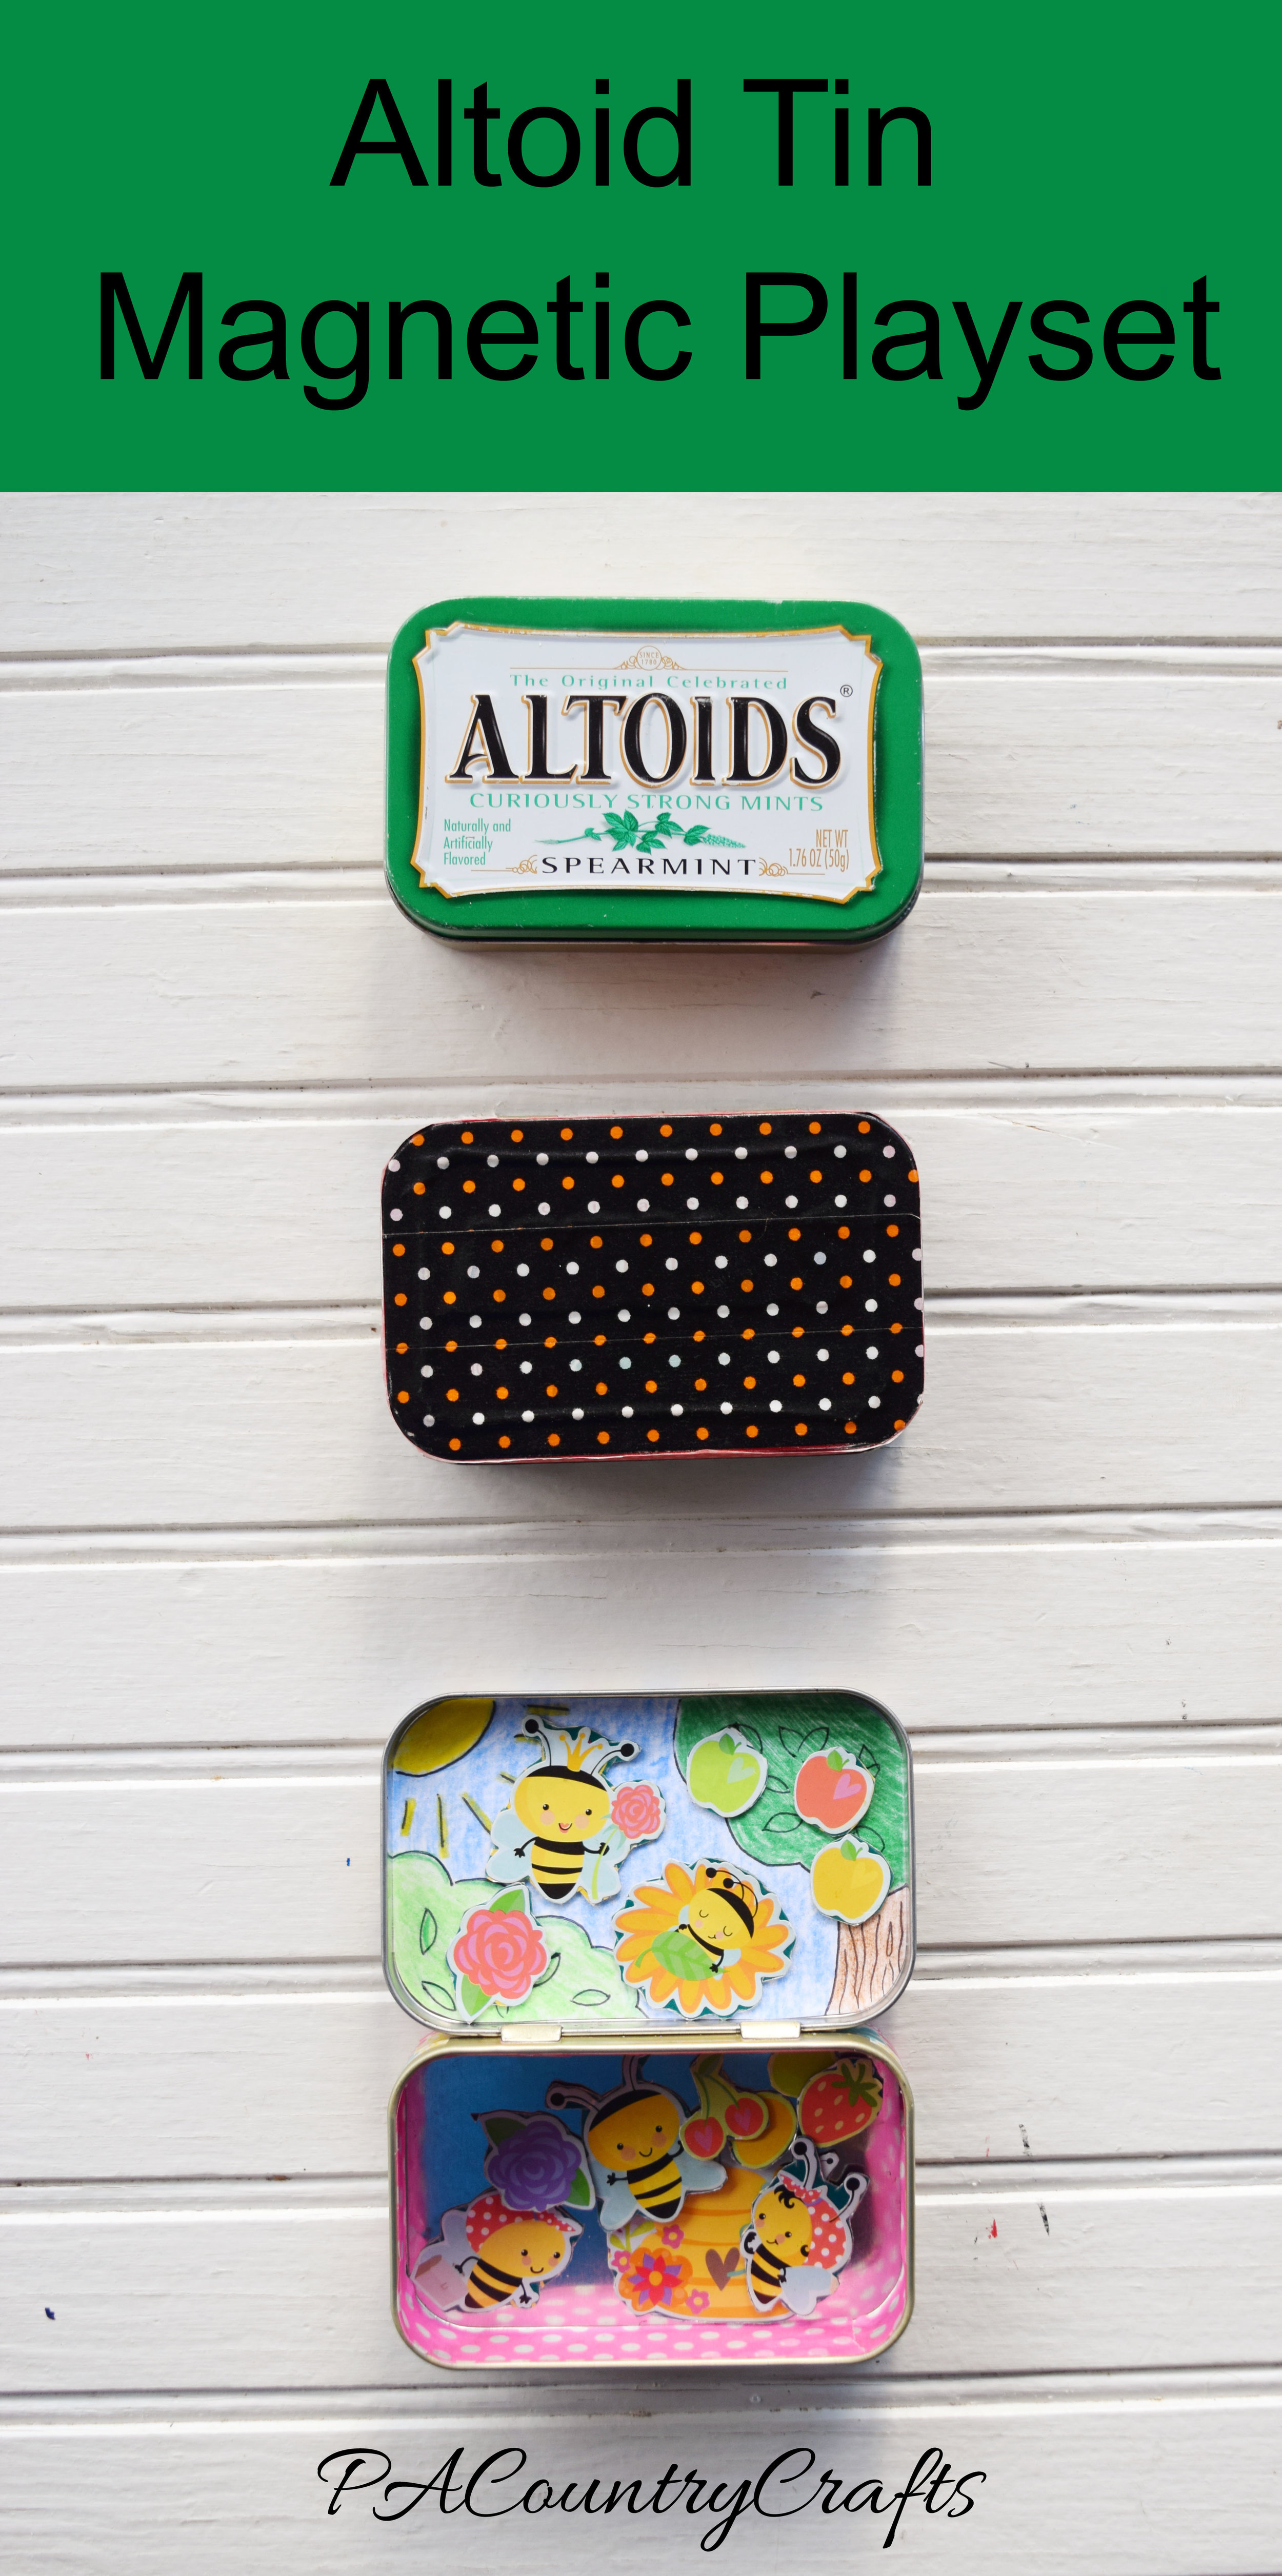 Altoid Tin Magnetic Playset Tutorial — PACountryCrafts